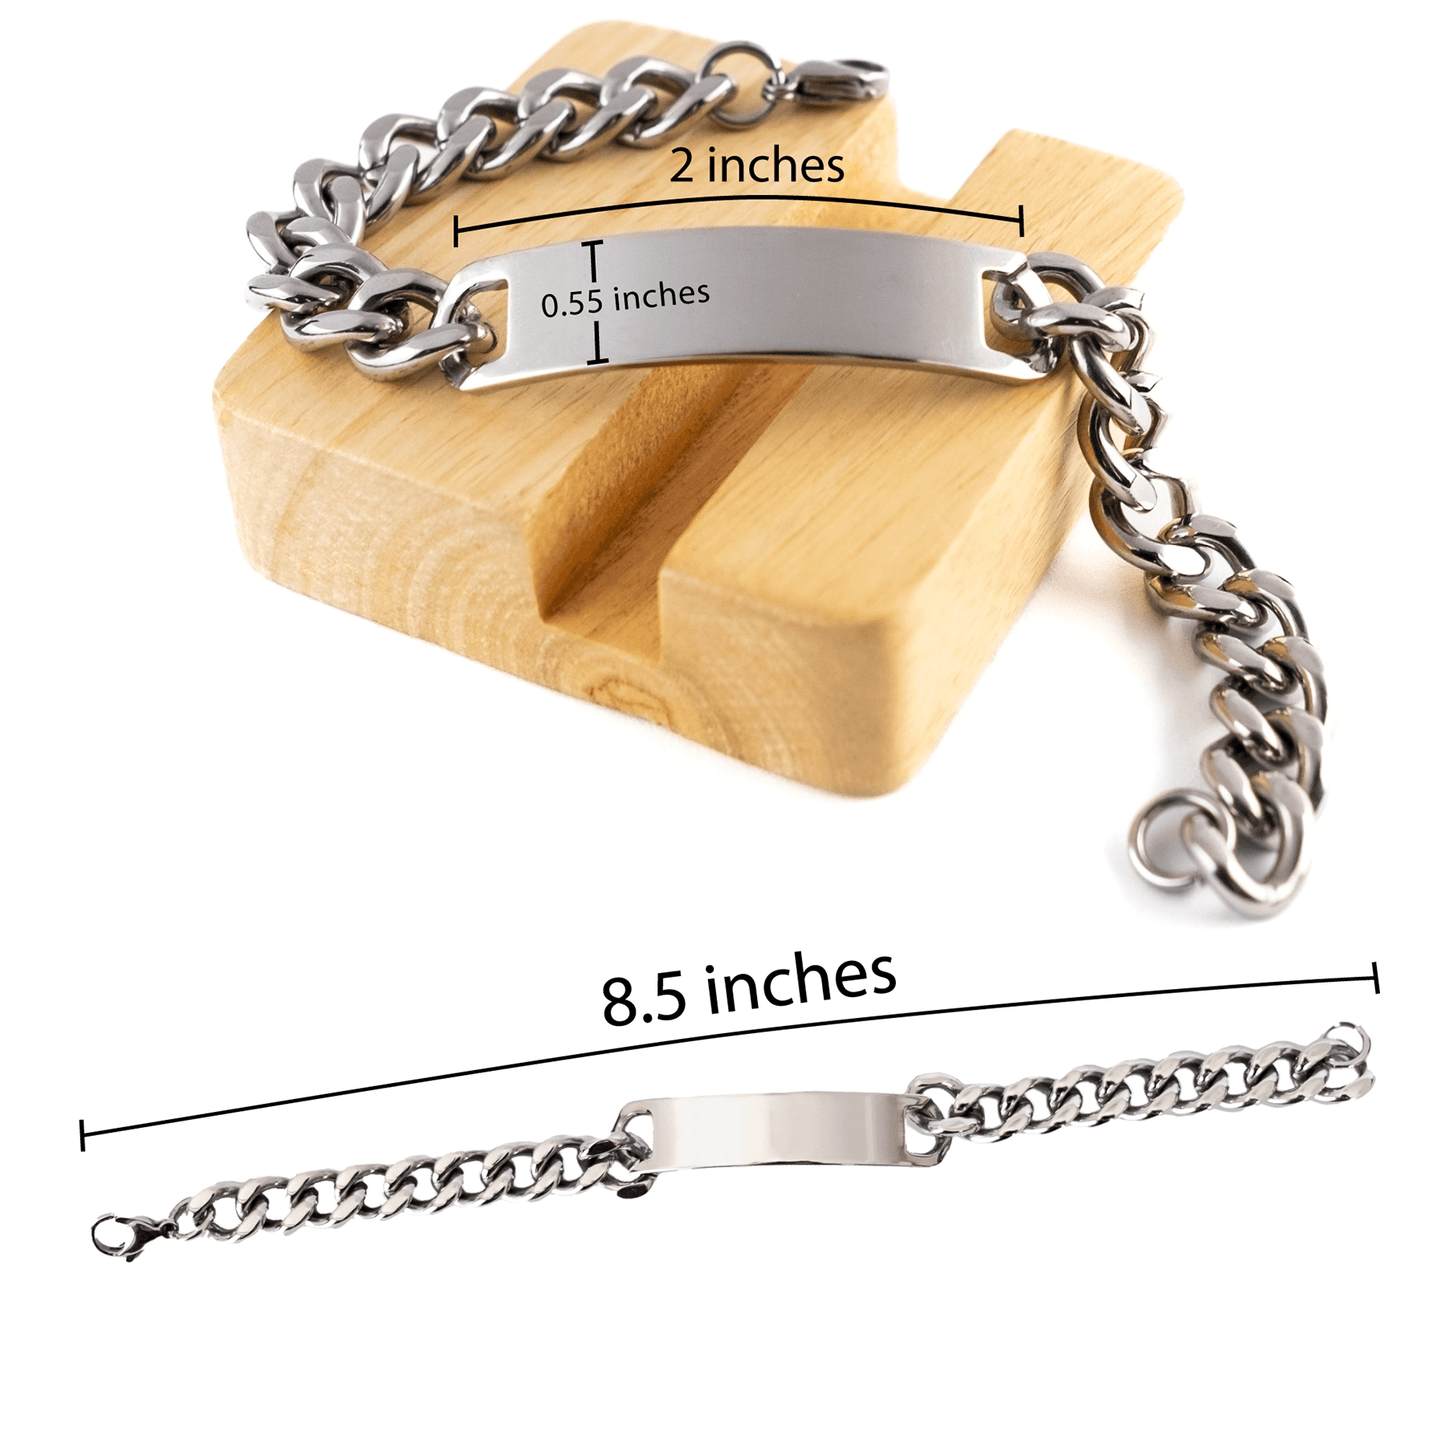 Remarkable Apartment Manager Gifts, Your dedication and hard work, Inspirational Birthday Christmas Unique Cuban Chain Stainless Steel Bracelet For Apartment Manager, Coworkers, Men, Women, Friends - Mallard Moon Gift Shop